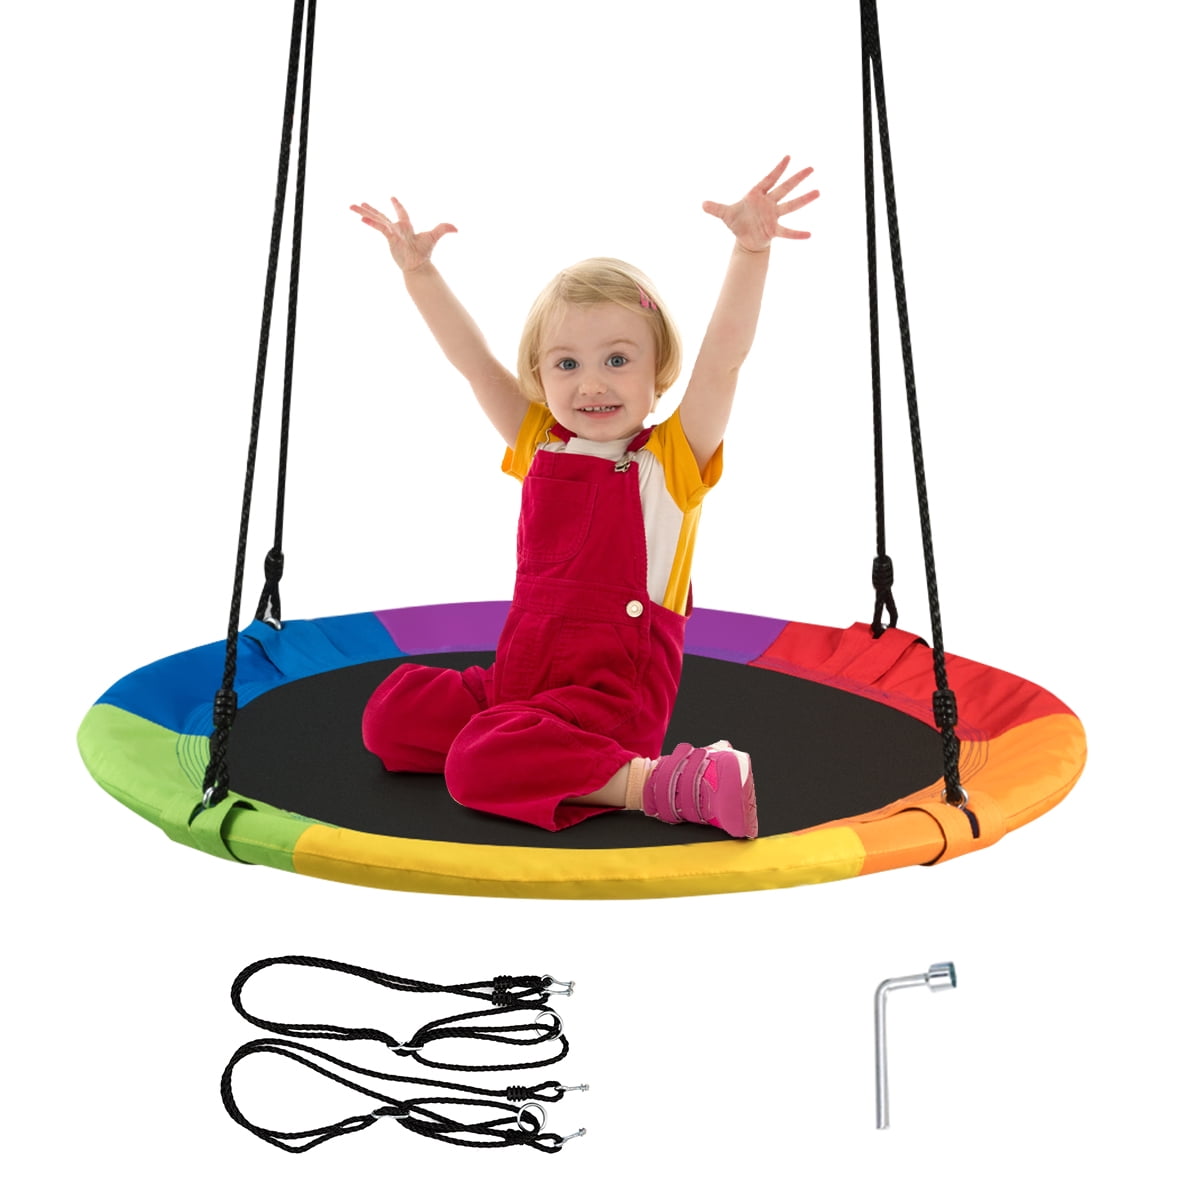 Blue Children Adults,Easy Install Dreambeauty Flying Saucer Tree Swing 40 Round Swing Set Giant Large Round Tree Swings for Kids Steel Frame Attaches to Trees or Existing Swing Sets 